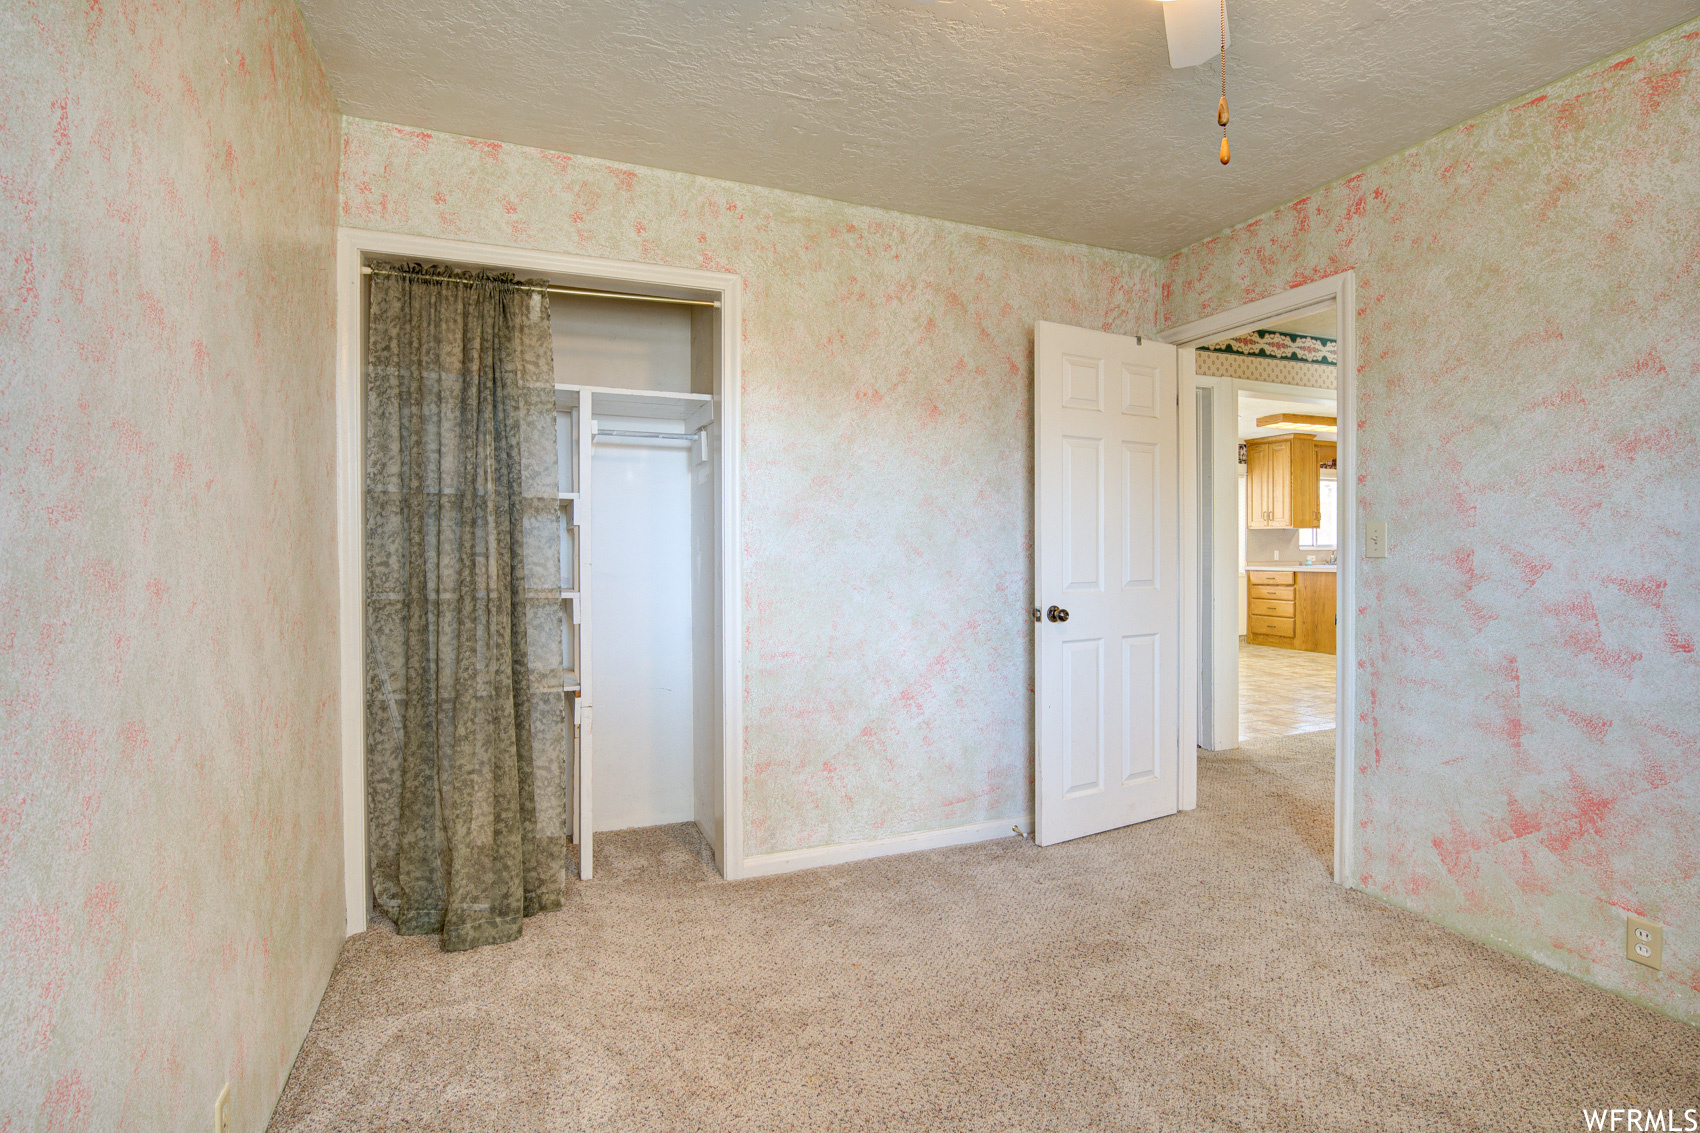 Unfurnished bedroom with ceiling fan, a closet, light colored carpet, and a textured ceiling